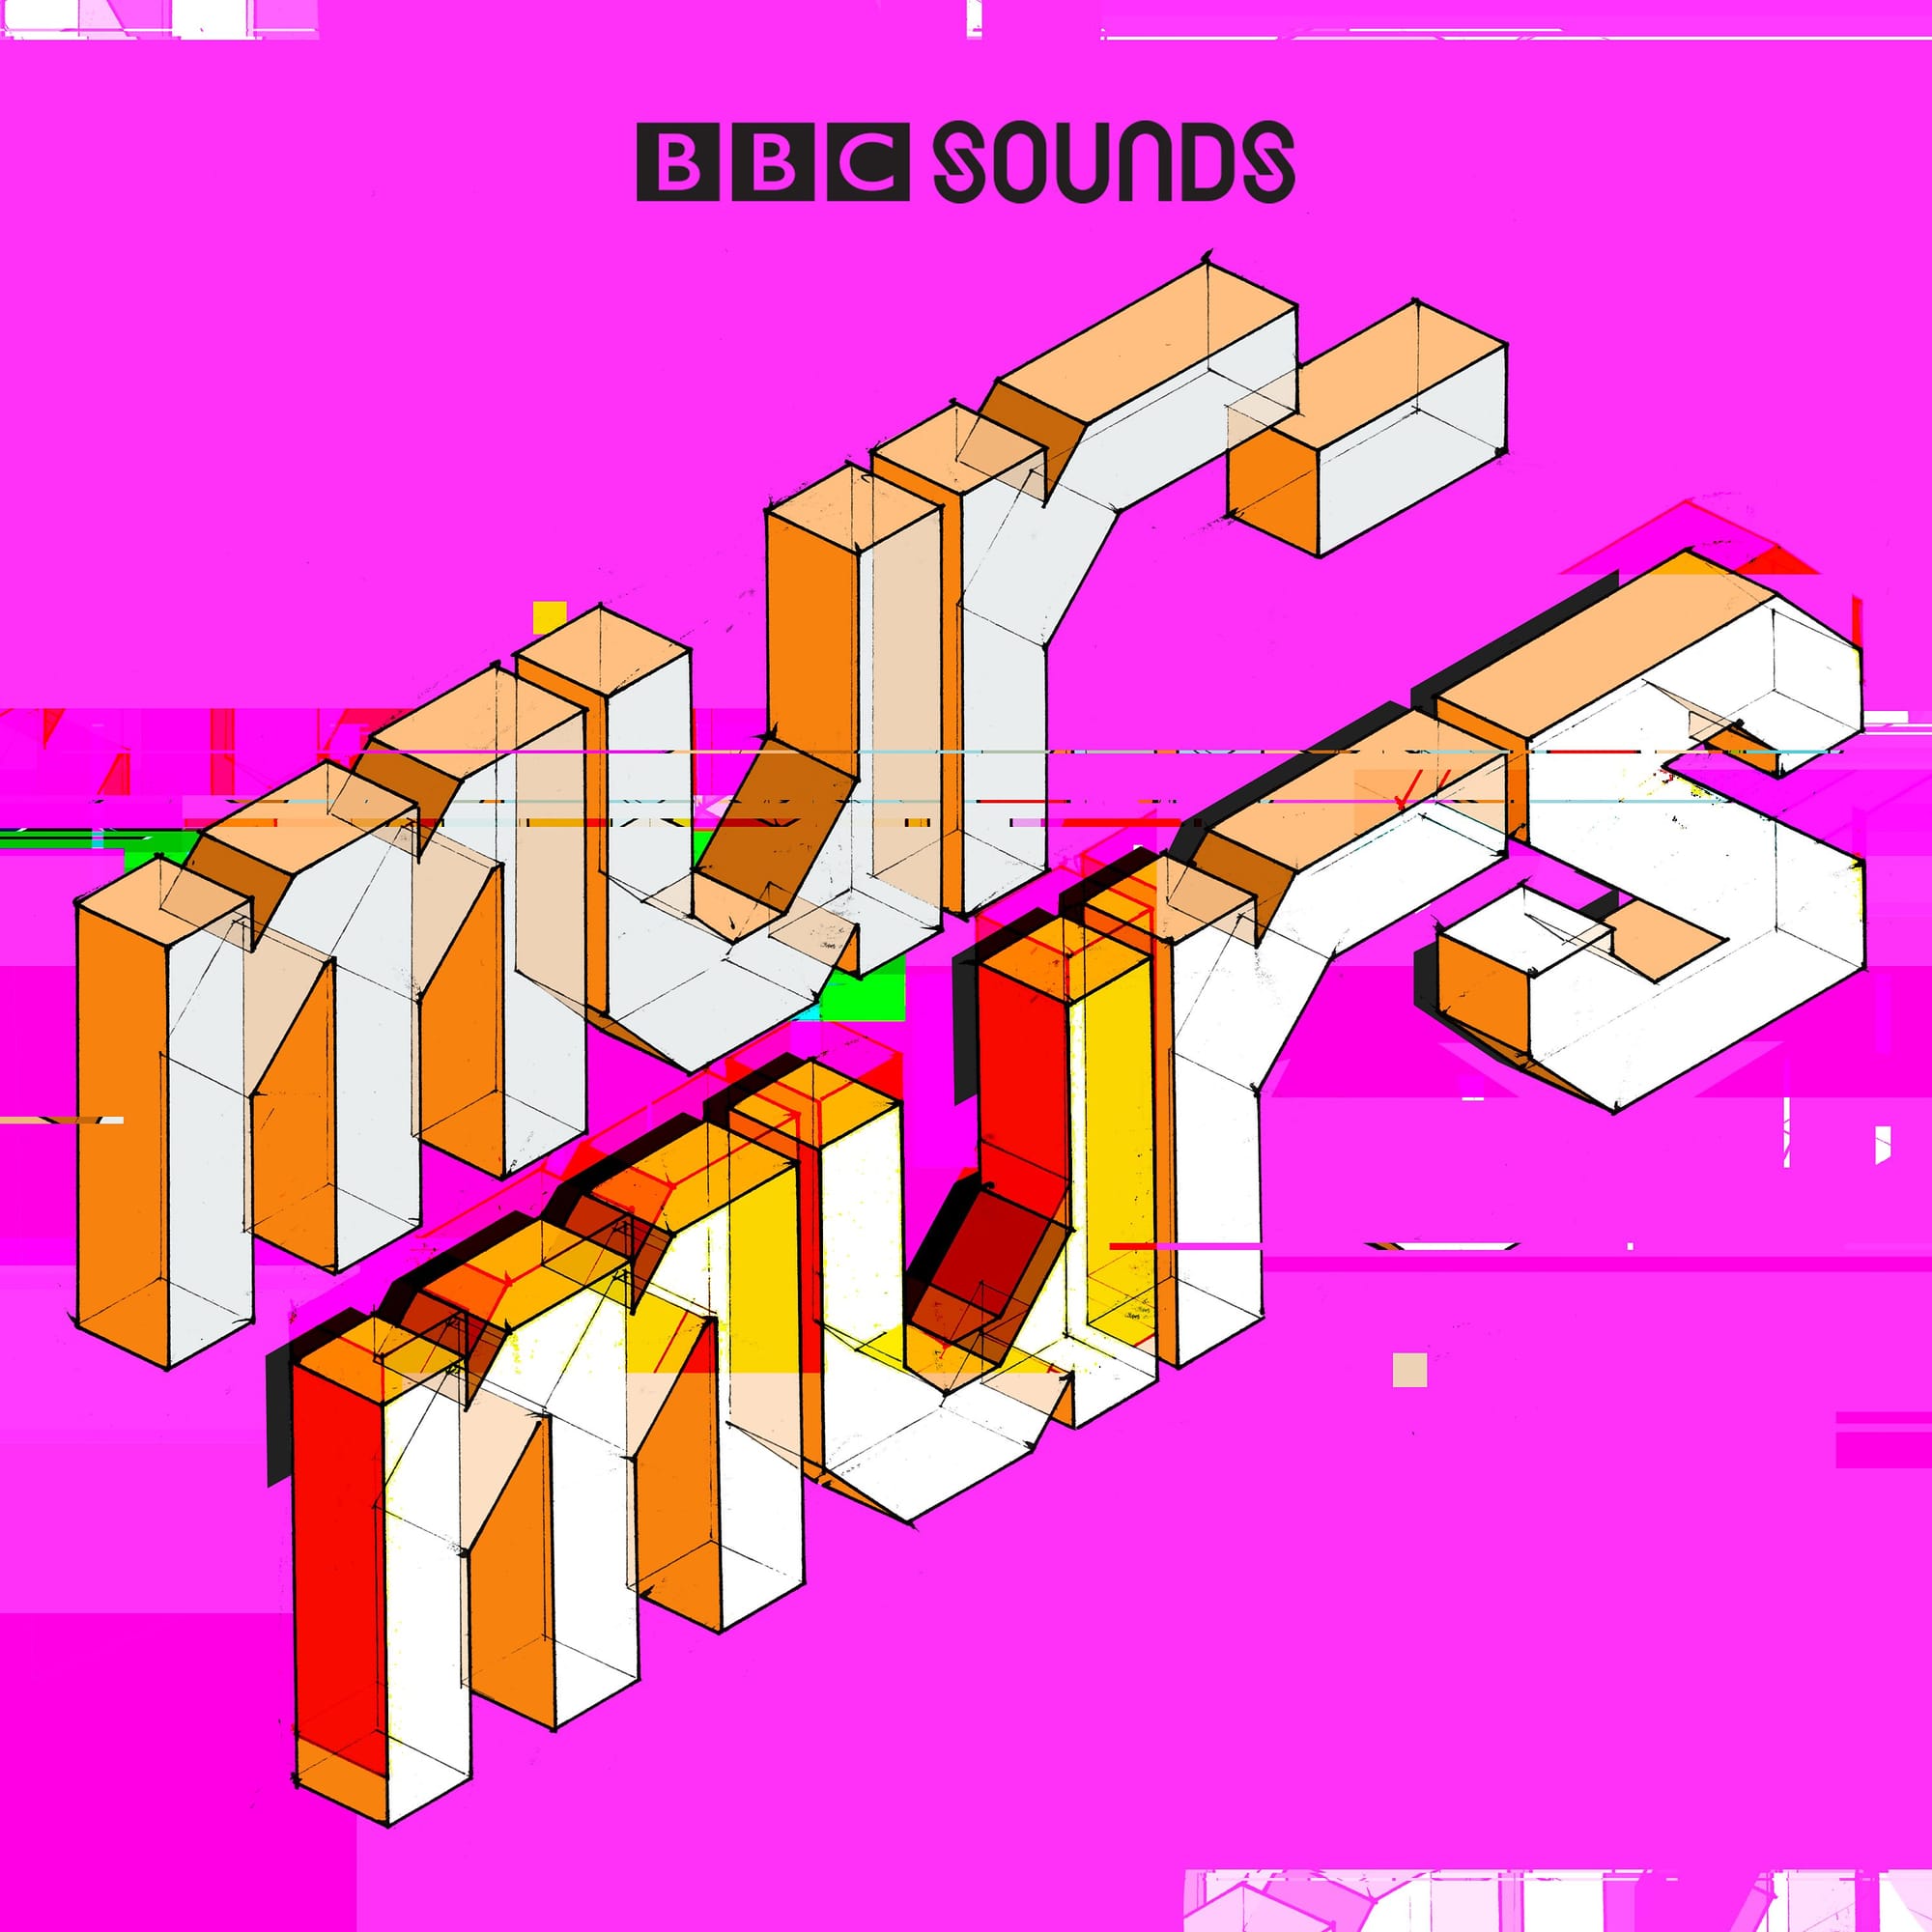 "Mur-murs" in a futuristic, 3D typeface on a purple, glitchy background.